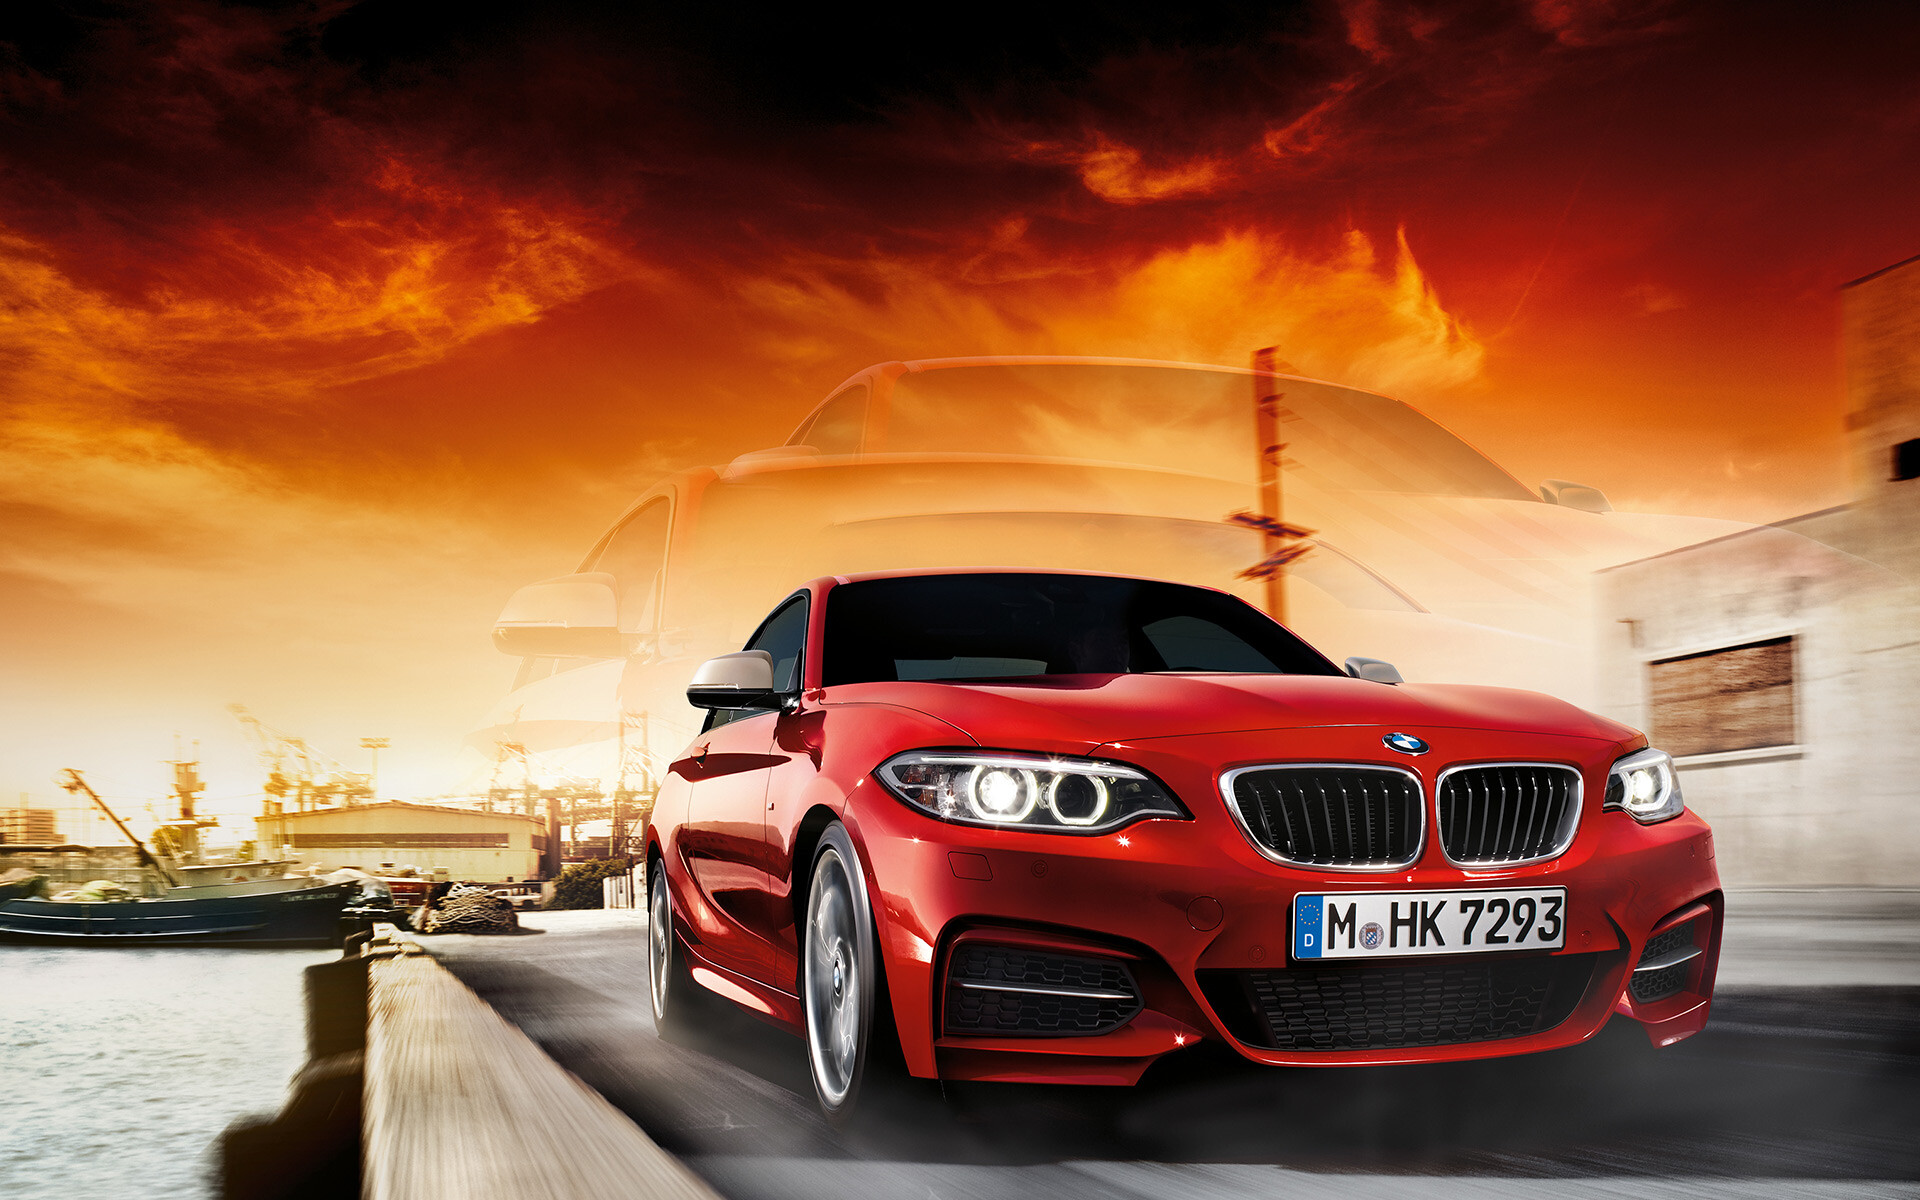 BMW 2 Series: German automaker, Known for technology and style, M235i, 301-horsepower engine. 1920x1200 HD Wallpaper.